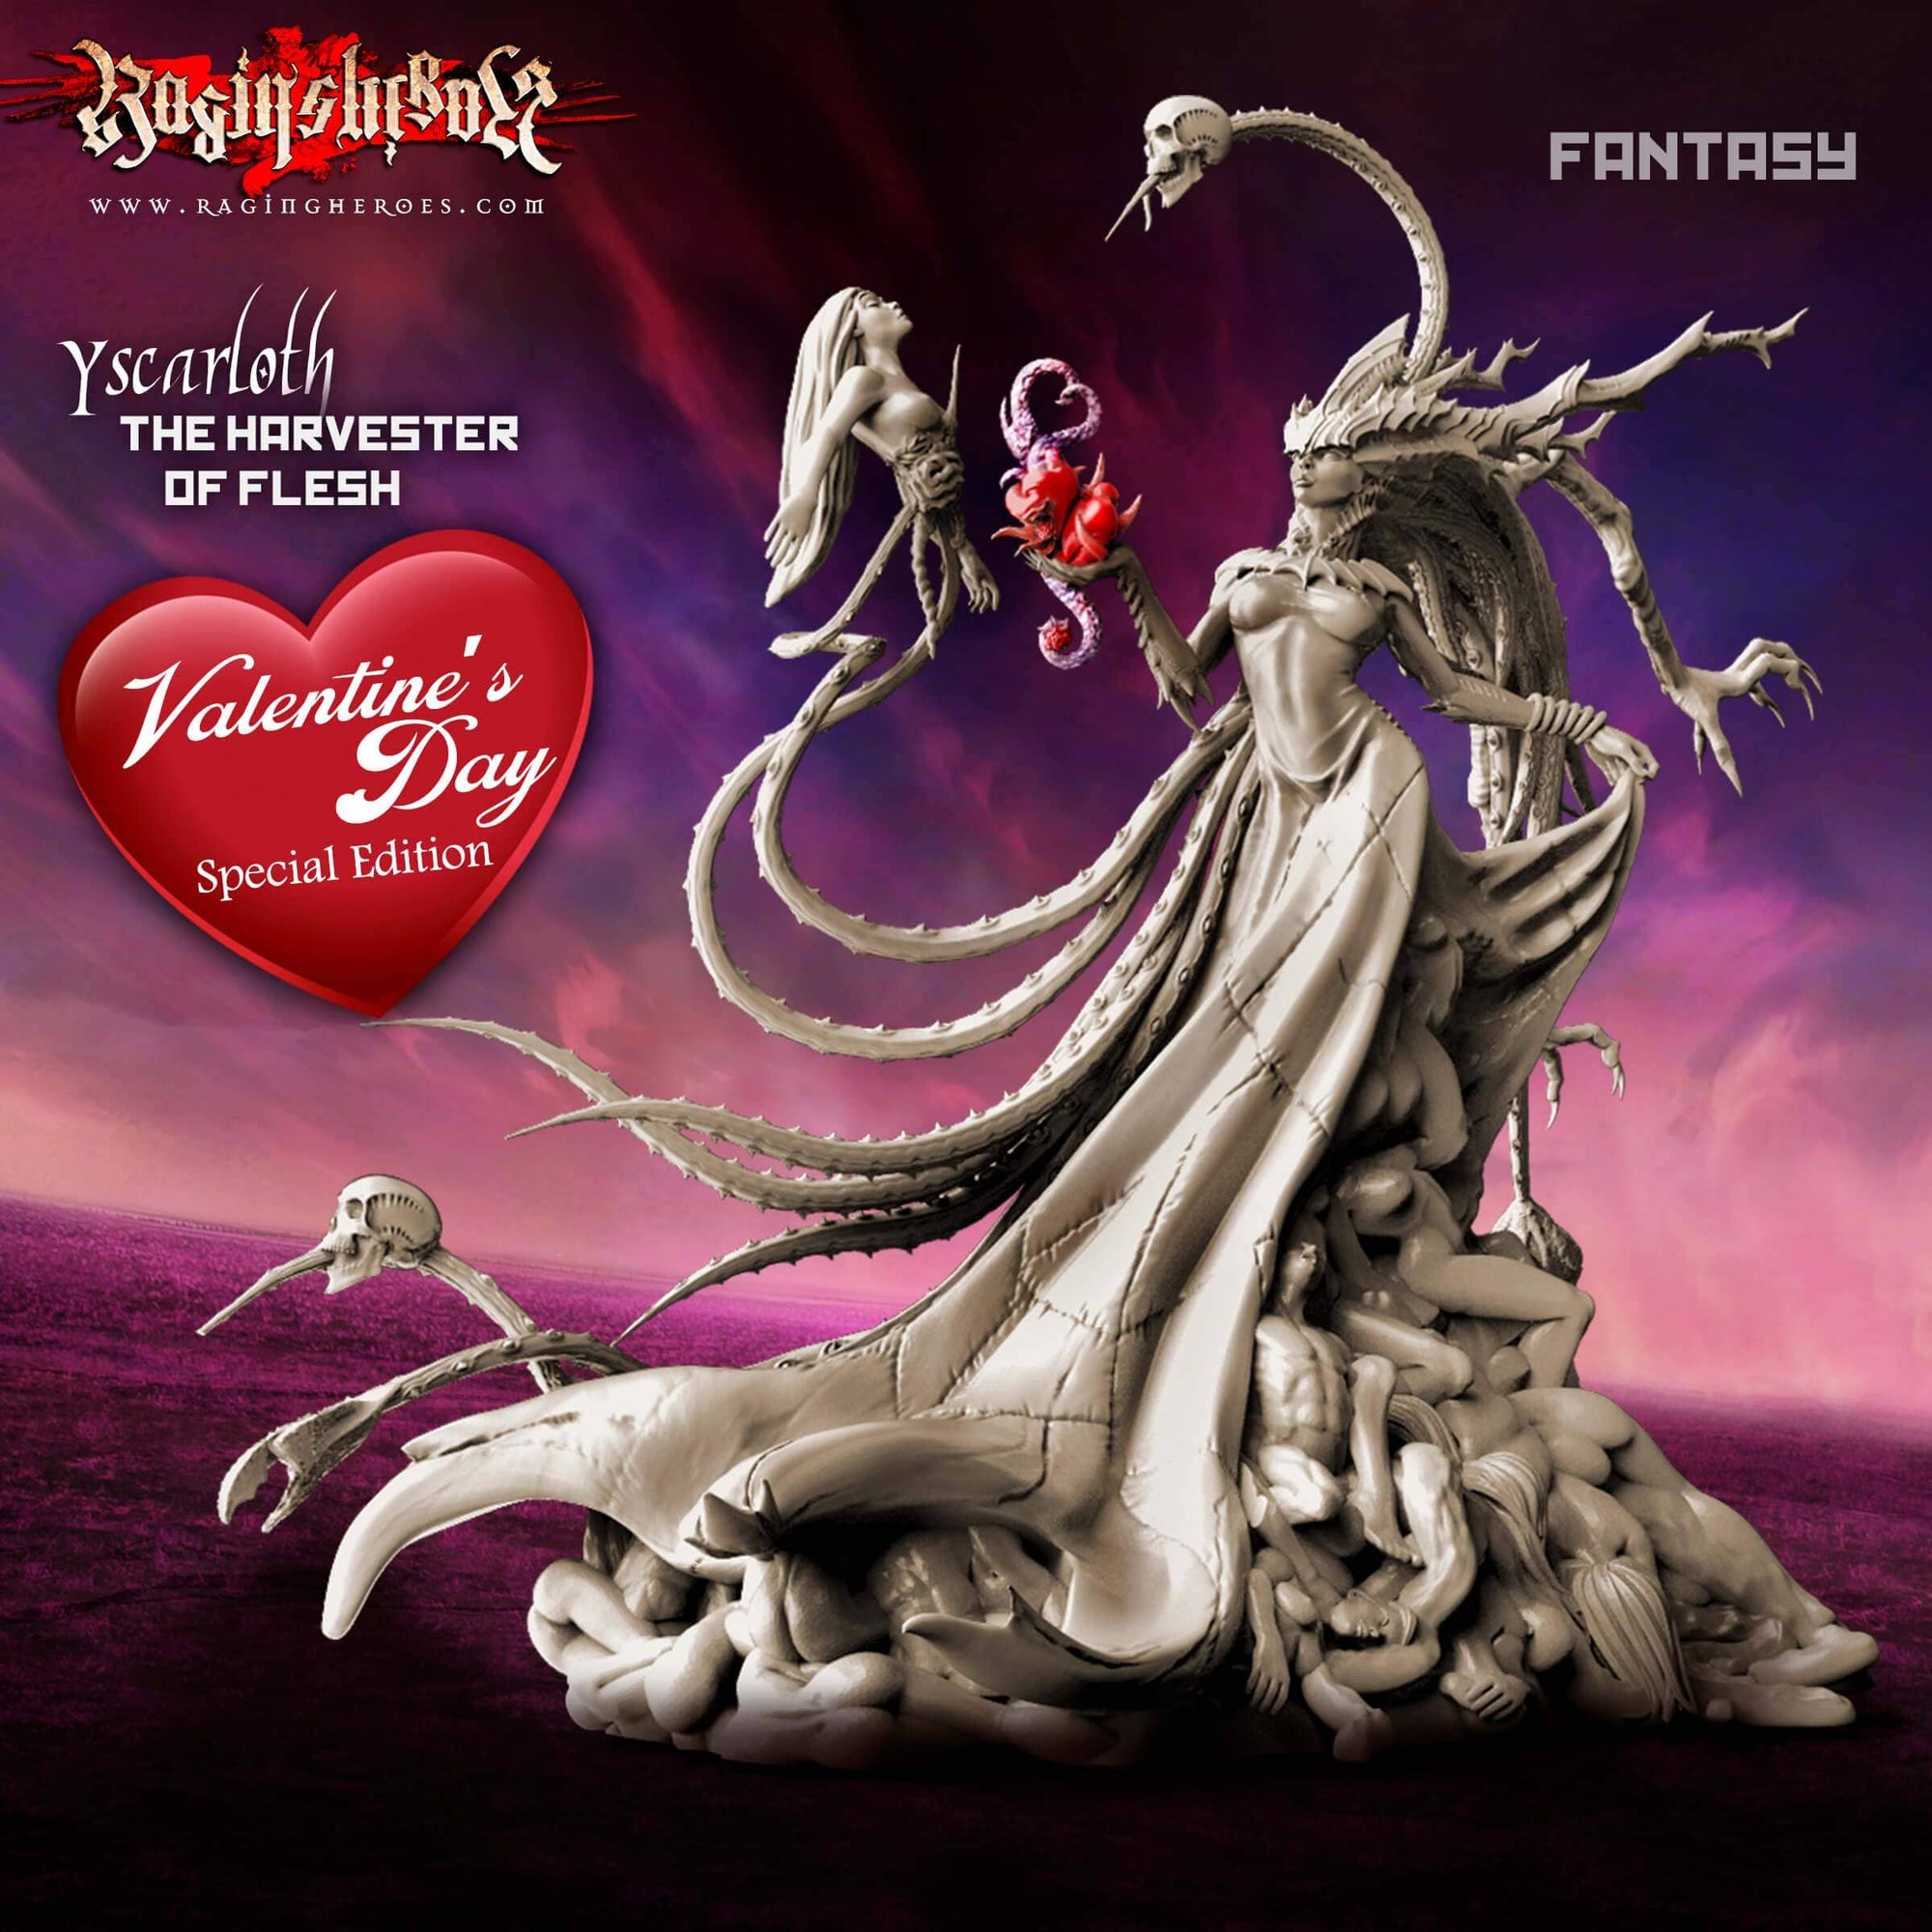 Yscarloth, The Harvester of Flesh, Valentine's Special Edition Fantasy Version (LE - F)